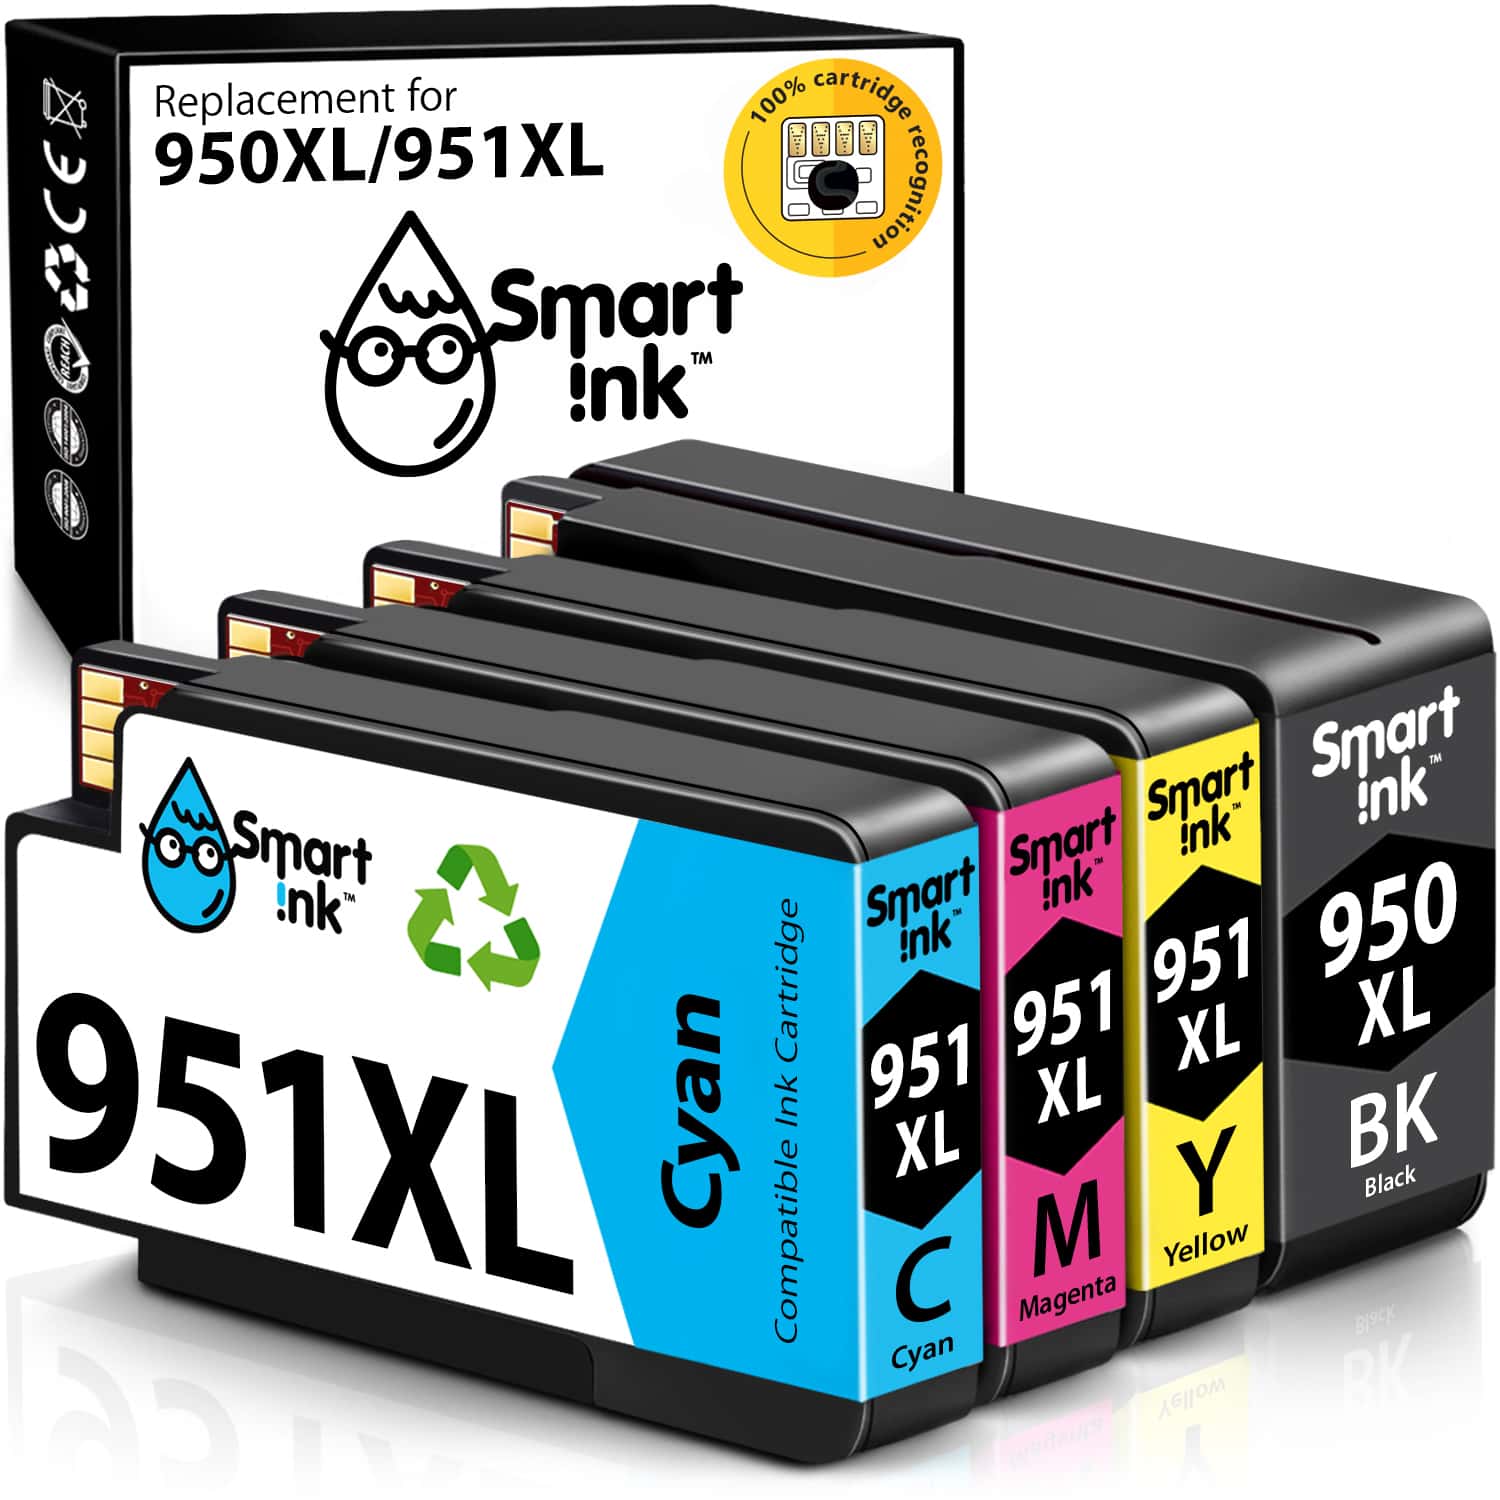 HP 950, 951 XL (4 Pack) Ink Cartridge Replacement - Buy Printer in EU at the best price | Ink